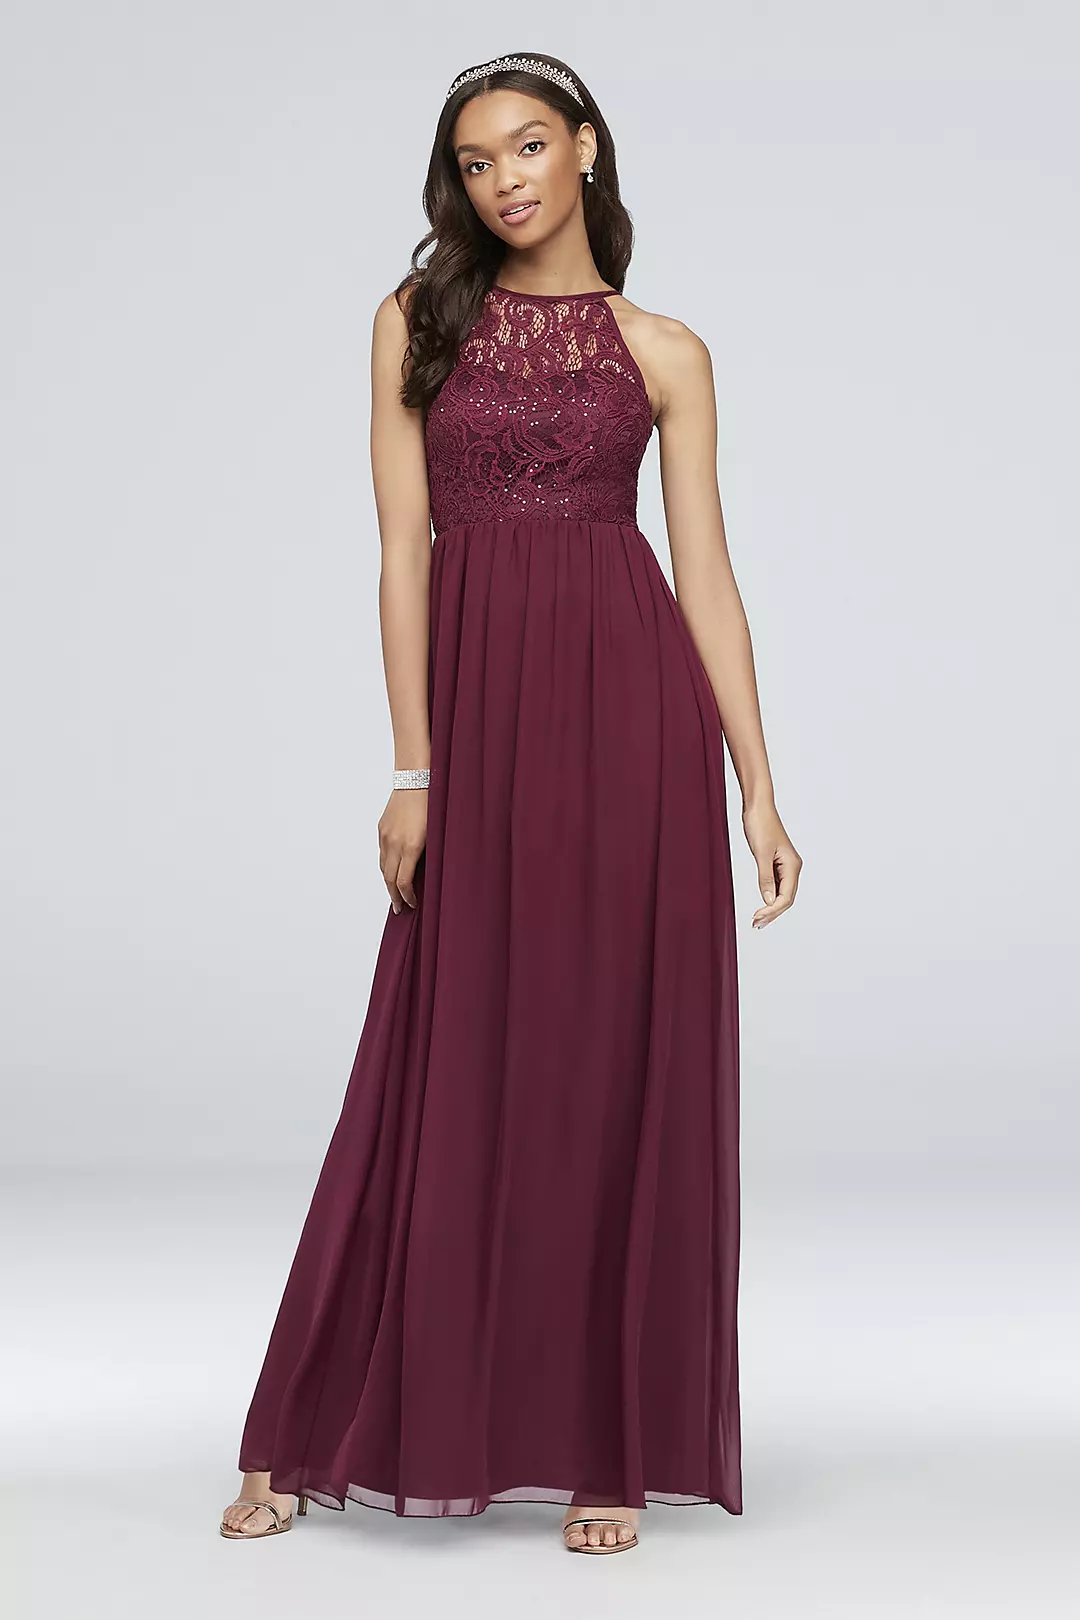 Illusion Lace and Chiffon Halter A-Line Gown Image